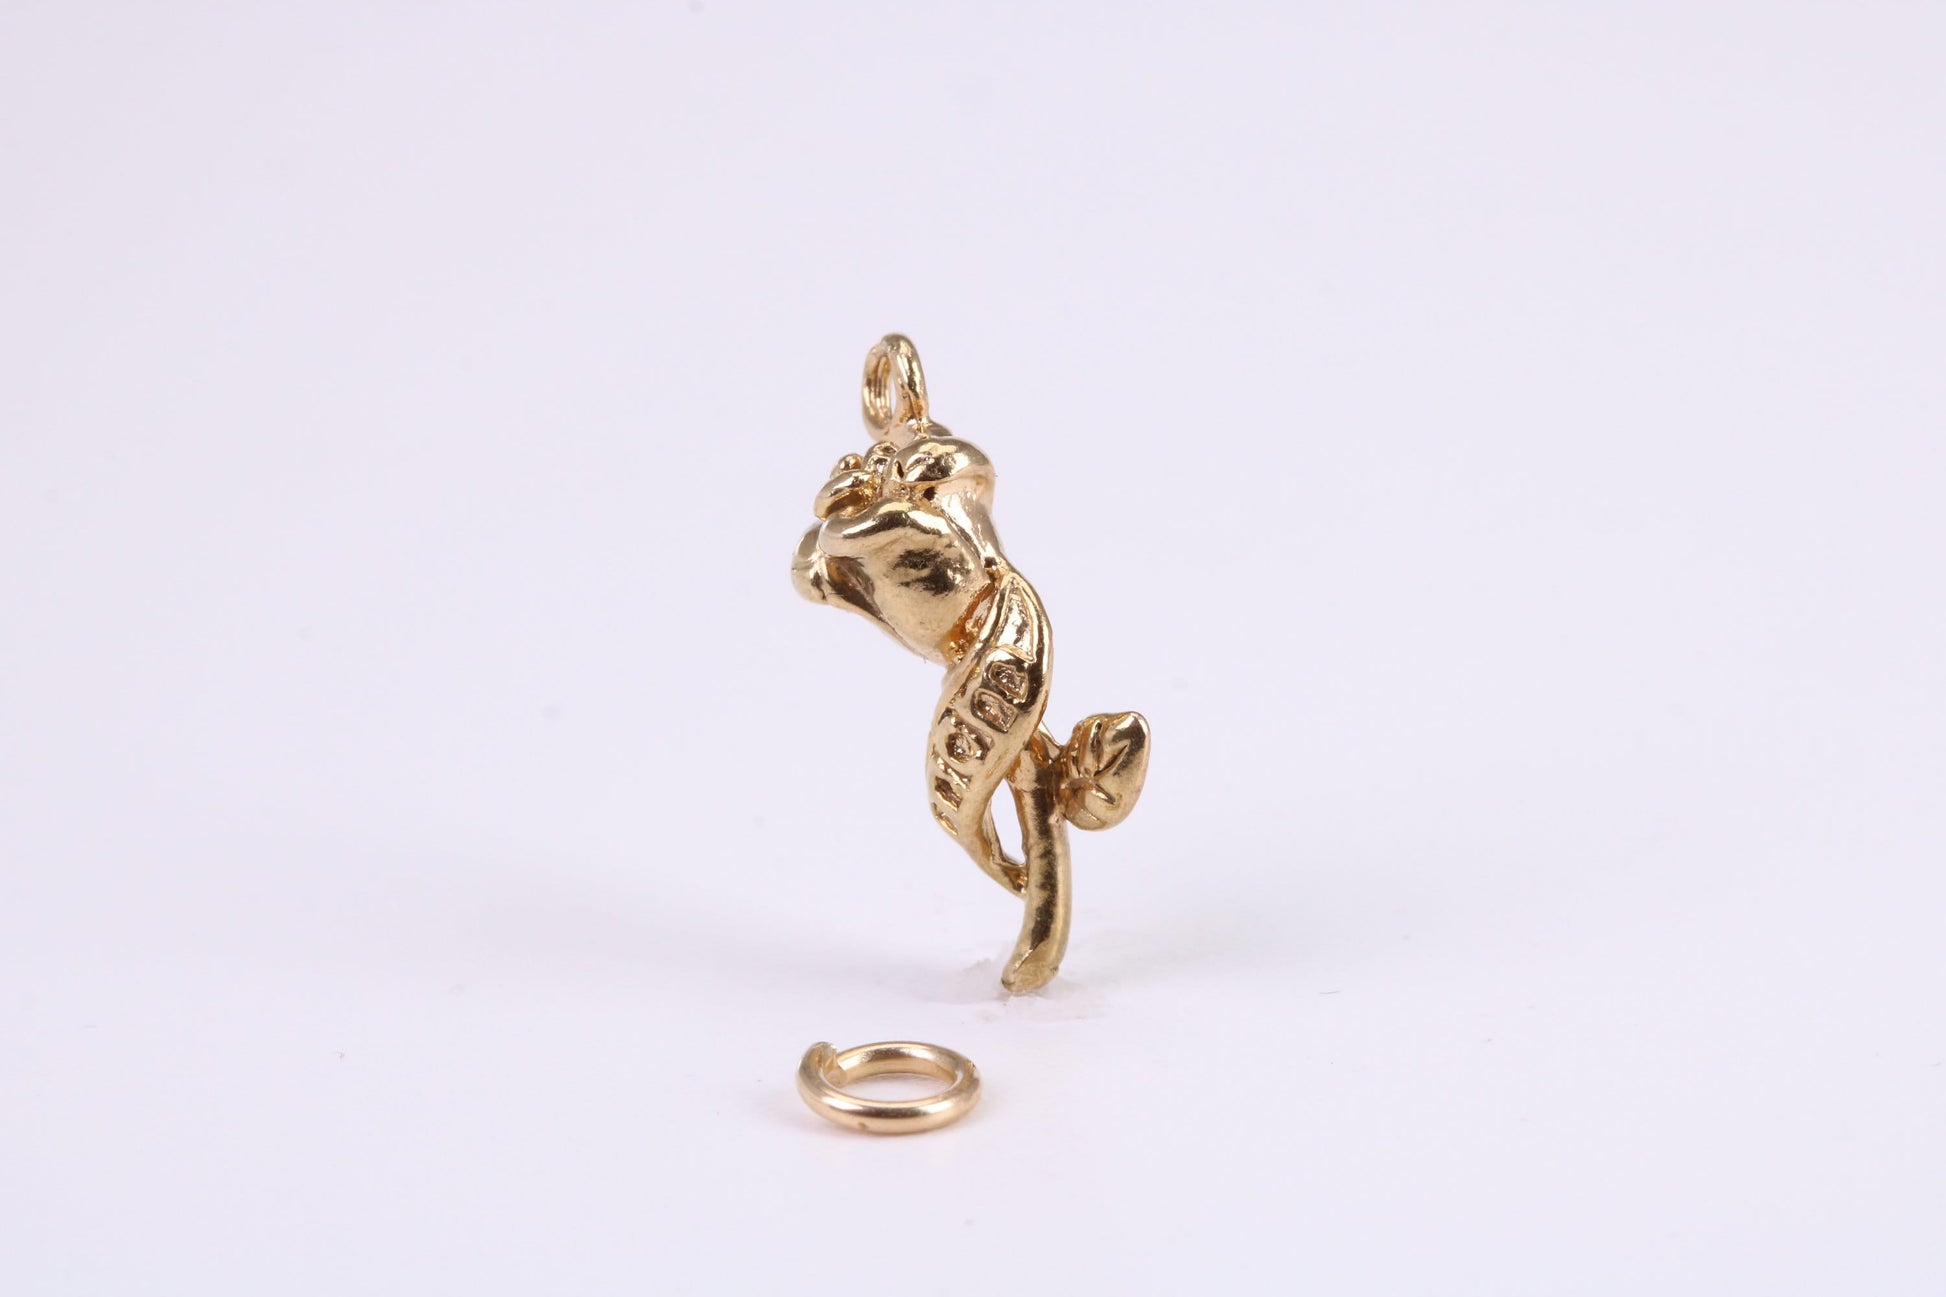 Mothers Day Rose Flower Charm, Traditional Charm, Made from Solid Yellow Gold, British Hallmarked, Complete with Attachment Link